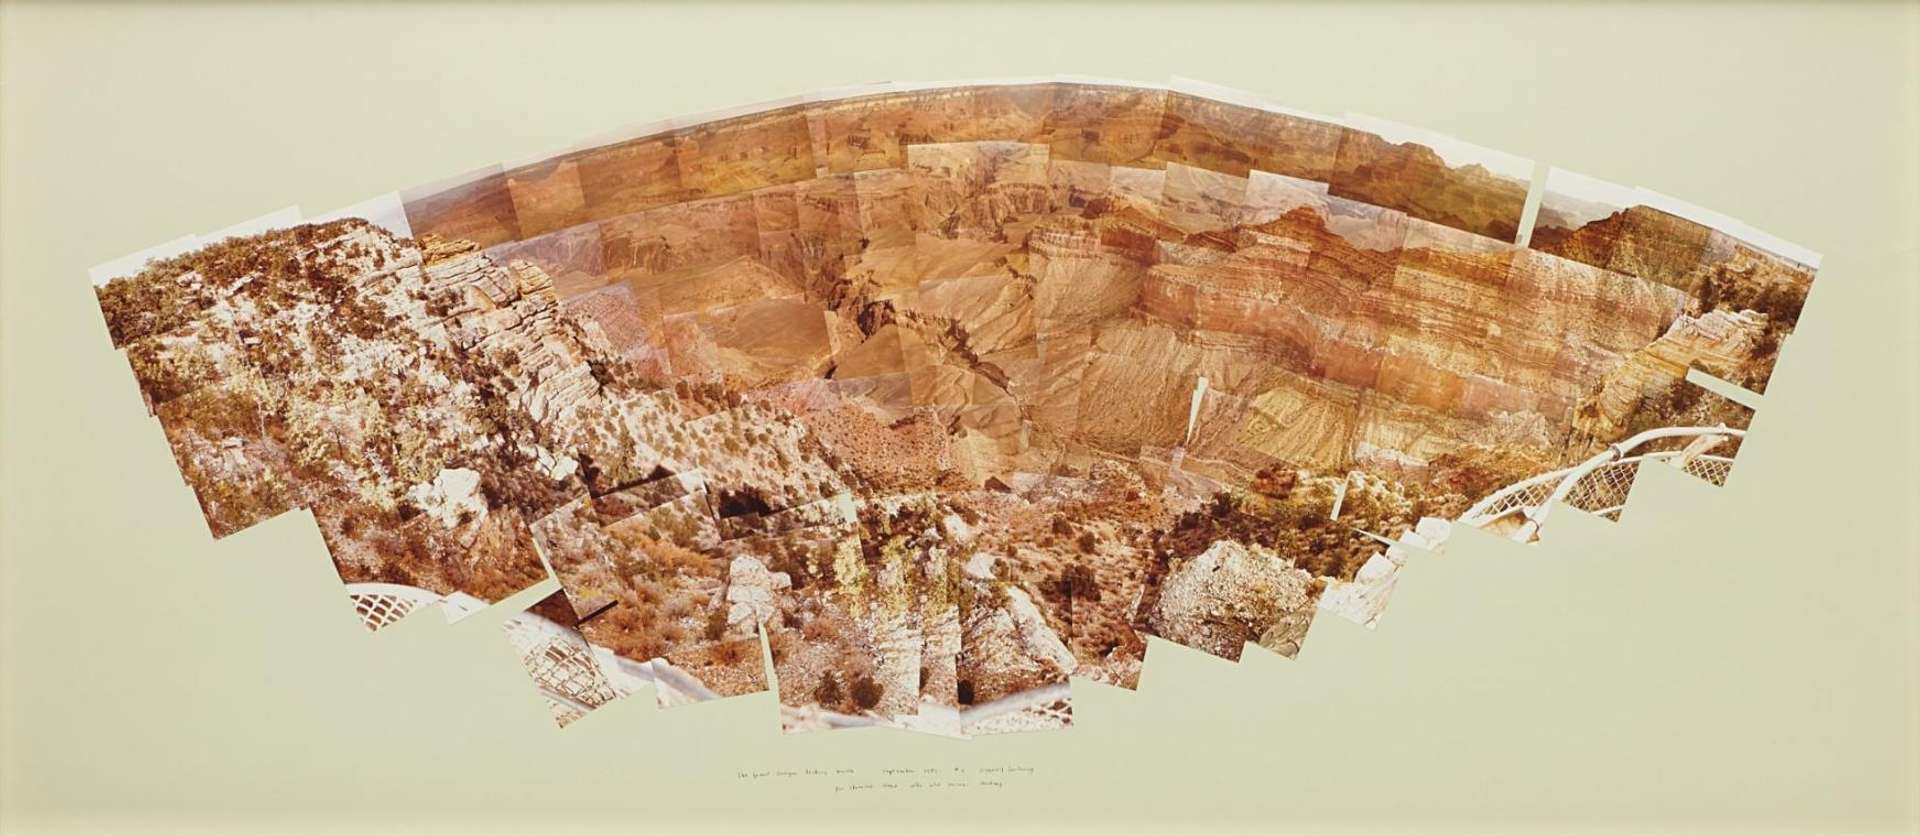 David Hockney's The Grand Canyon Looking North, September 1982. A photo collage of the Grand Canyon.